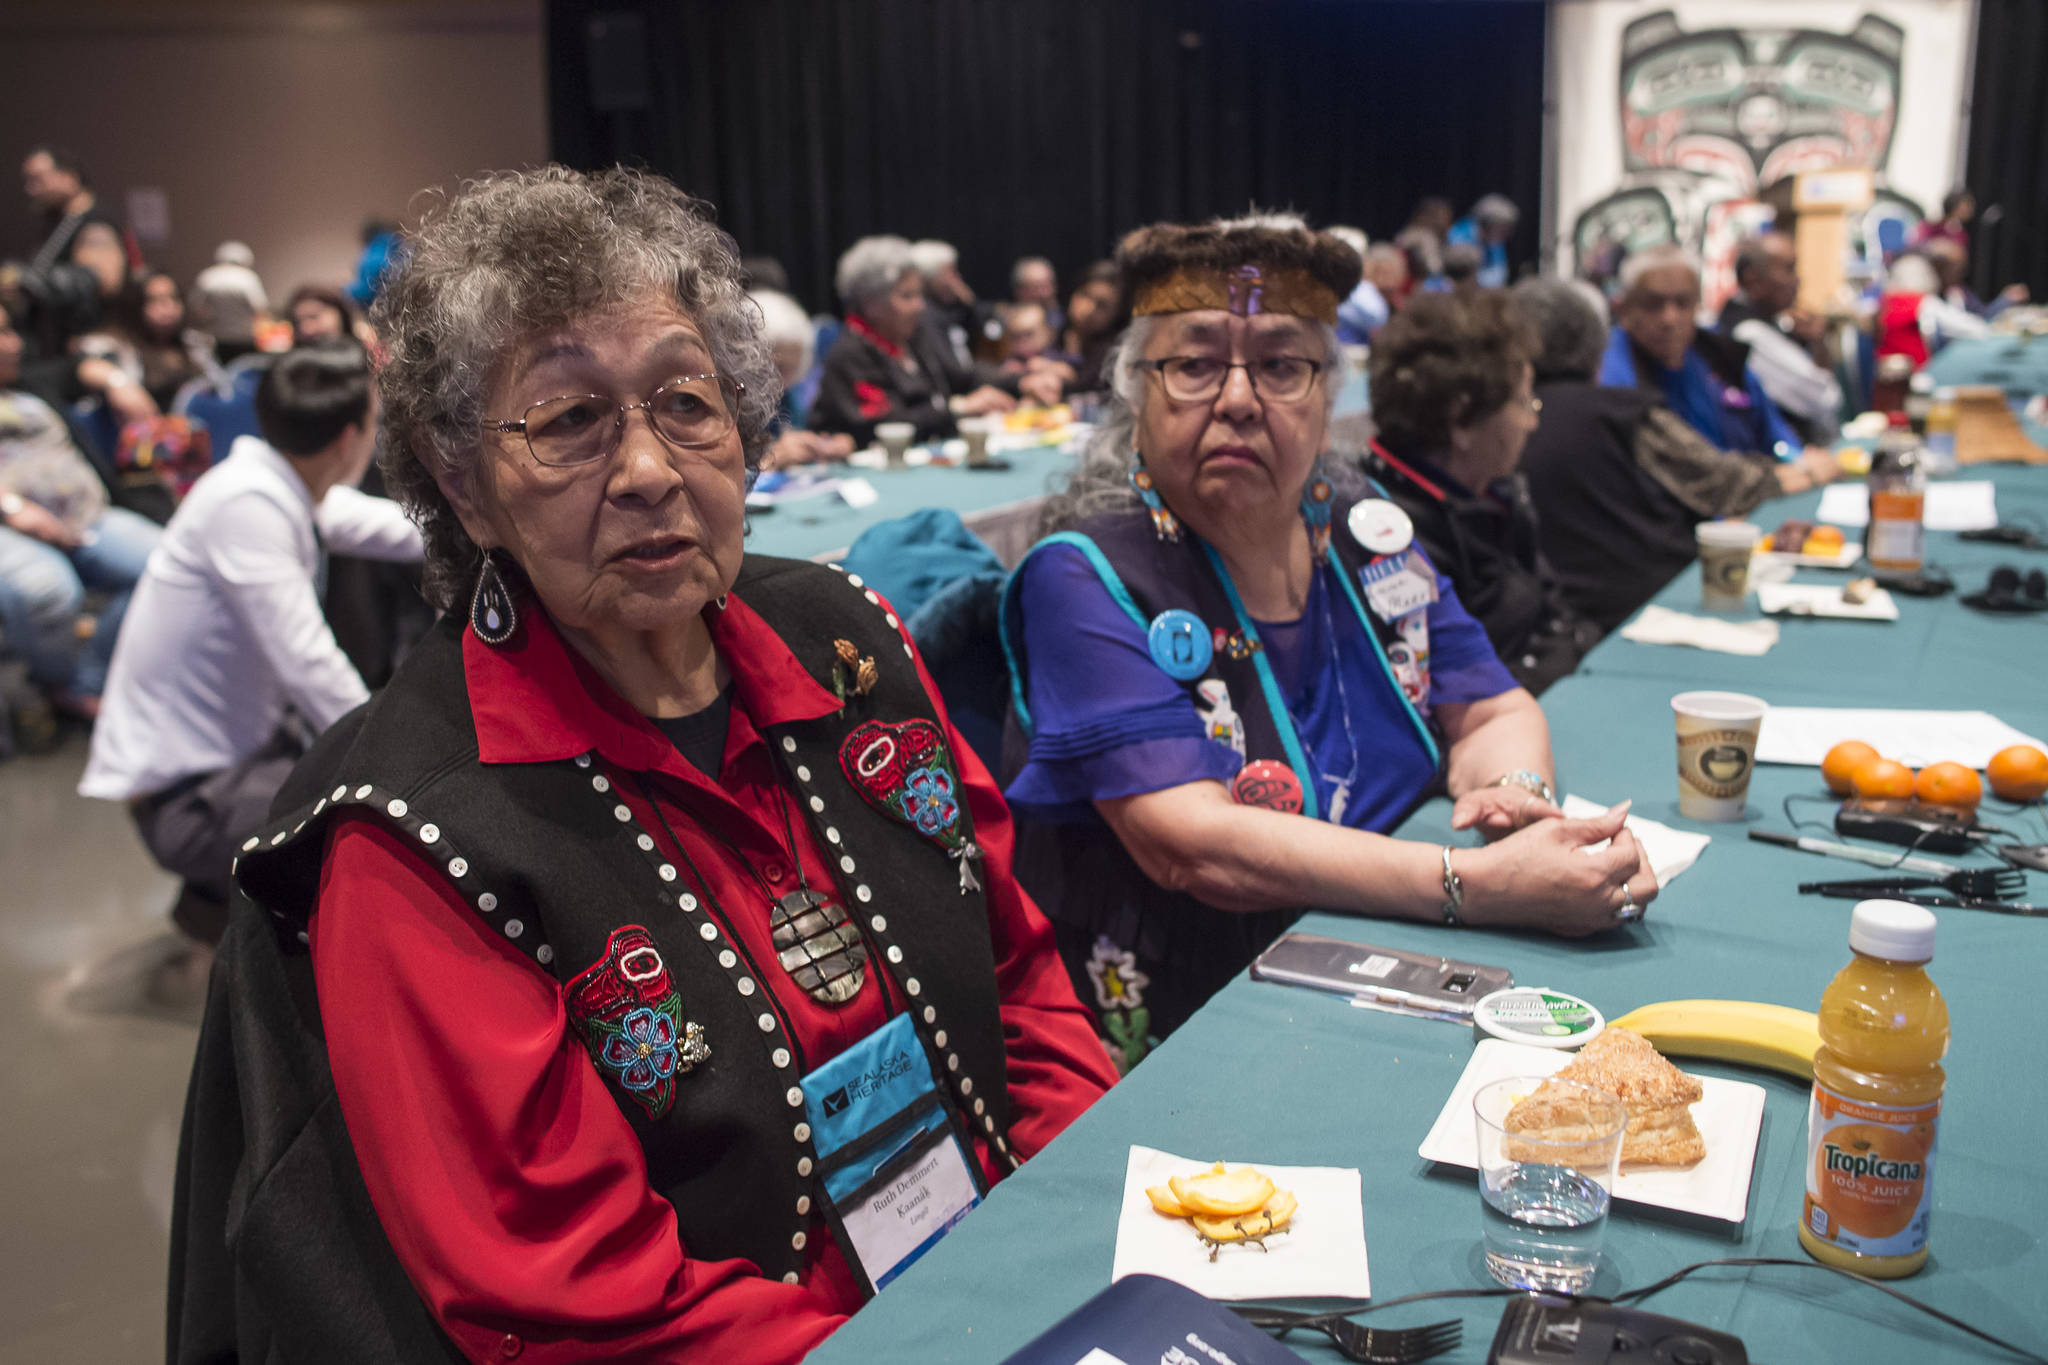 Ruth Demmert, left, and Florence Sheakley talk about how new words are created in Native languages at the Voices of Our Ancestors Language Summit at Centennial Hall on Wednesday, Nov. 14, 2018. (Michael Penn | Juneau Empire)